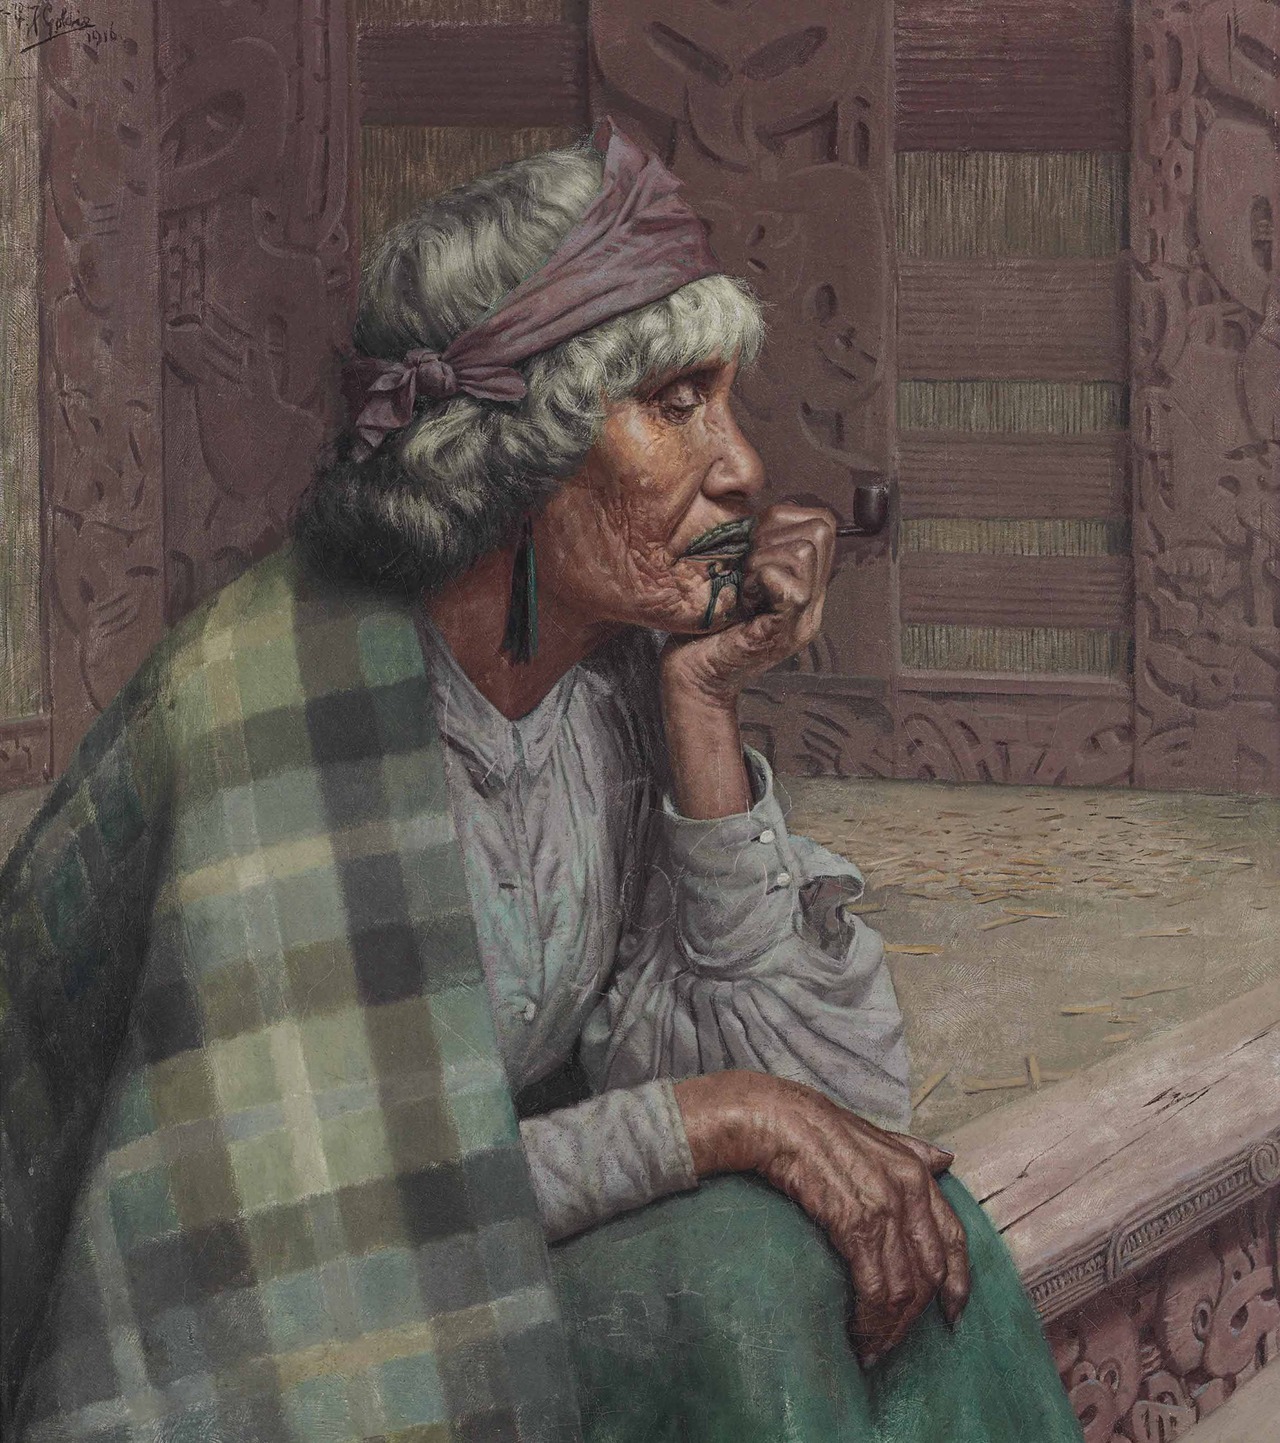 Charles Frederick Goldie (1870-1949) - Reverie, Ena te Papatahi, a Ngapuhi chieftainess (Ina te Papatahi, Ngapuhi)
Oil on canvas. Painted in 1916.
18 x 16 inches, 45.7 x 40.7 cm. Estimate: £200,000-300,000.
Sold Christie’s, London, 24 Sept 2015 for...